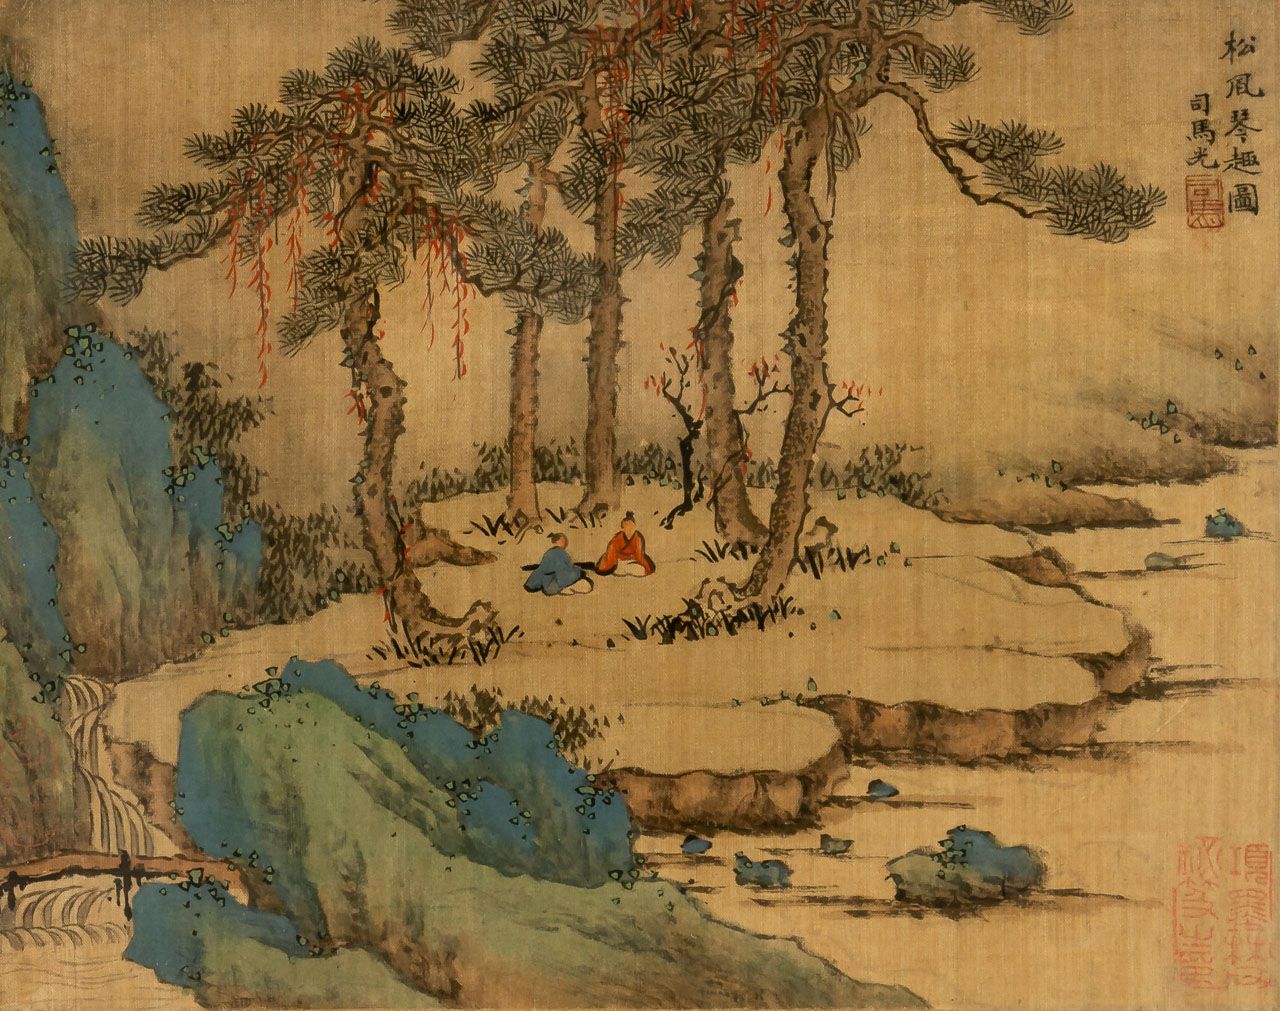 LANDSCHAFT A CHINESE SILKPAINTING SHOWING A LANDSCAPE_x000D_

19th c._x000D_

Cl&hellip;